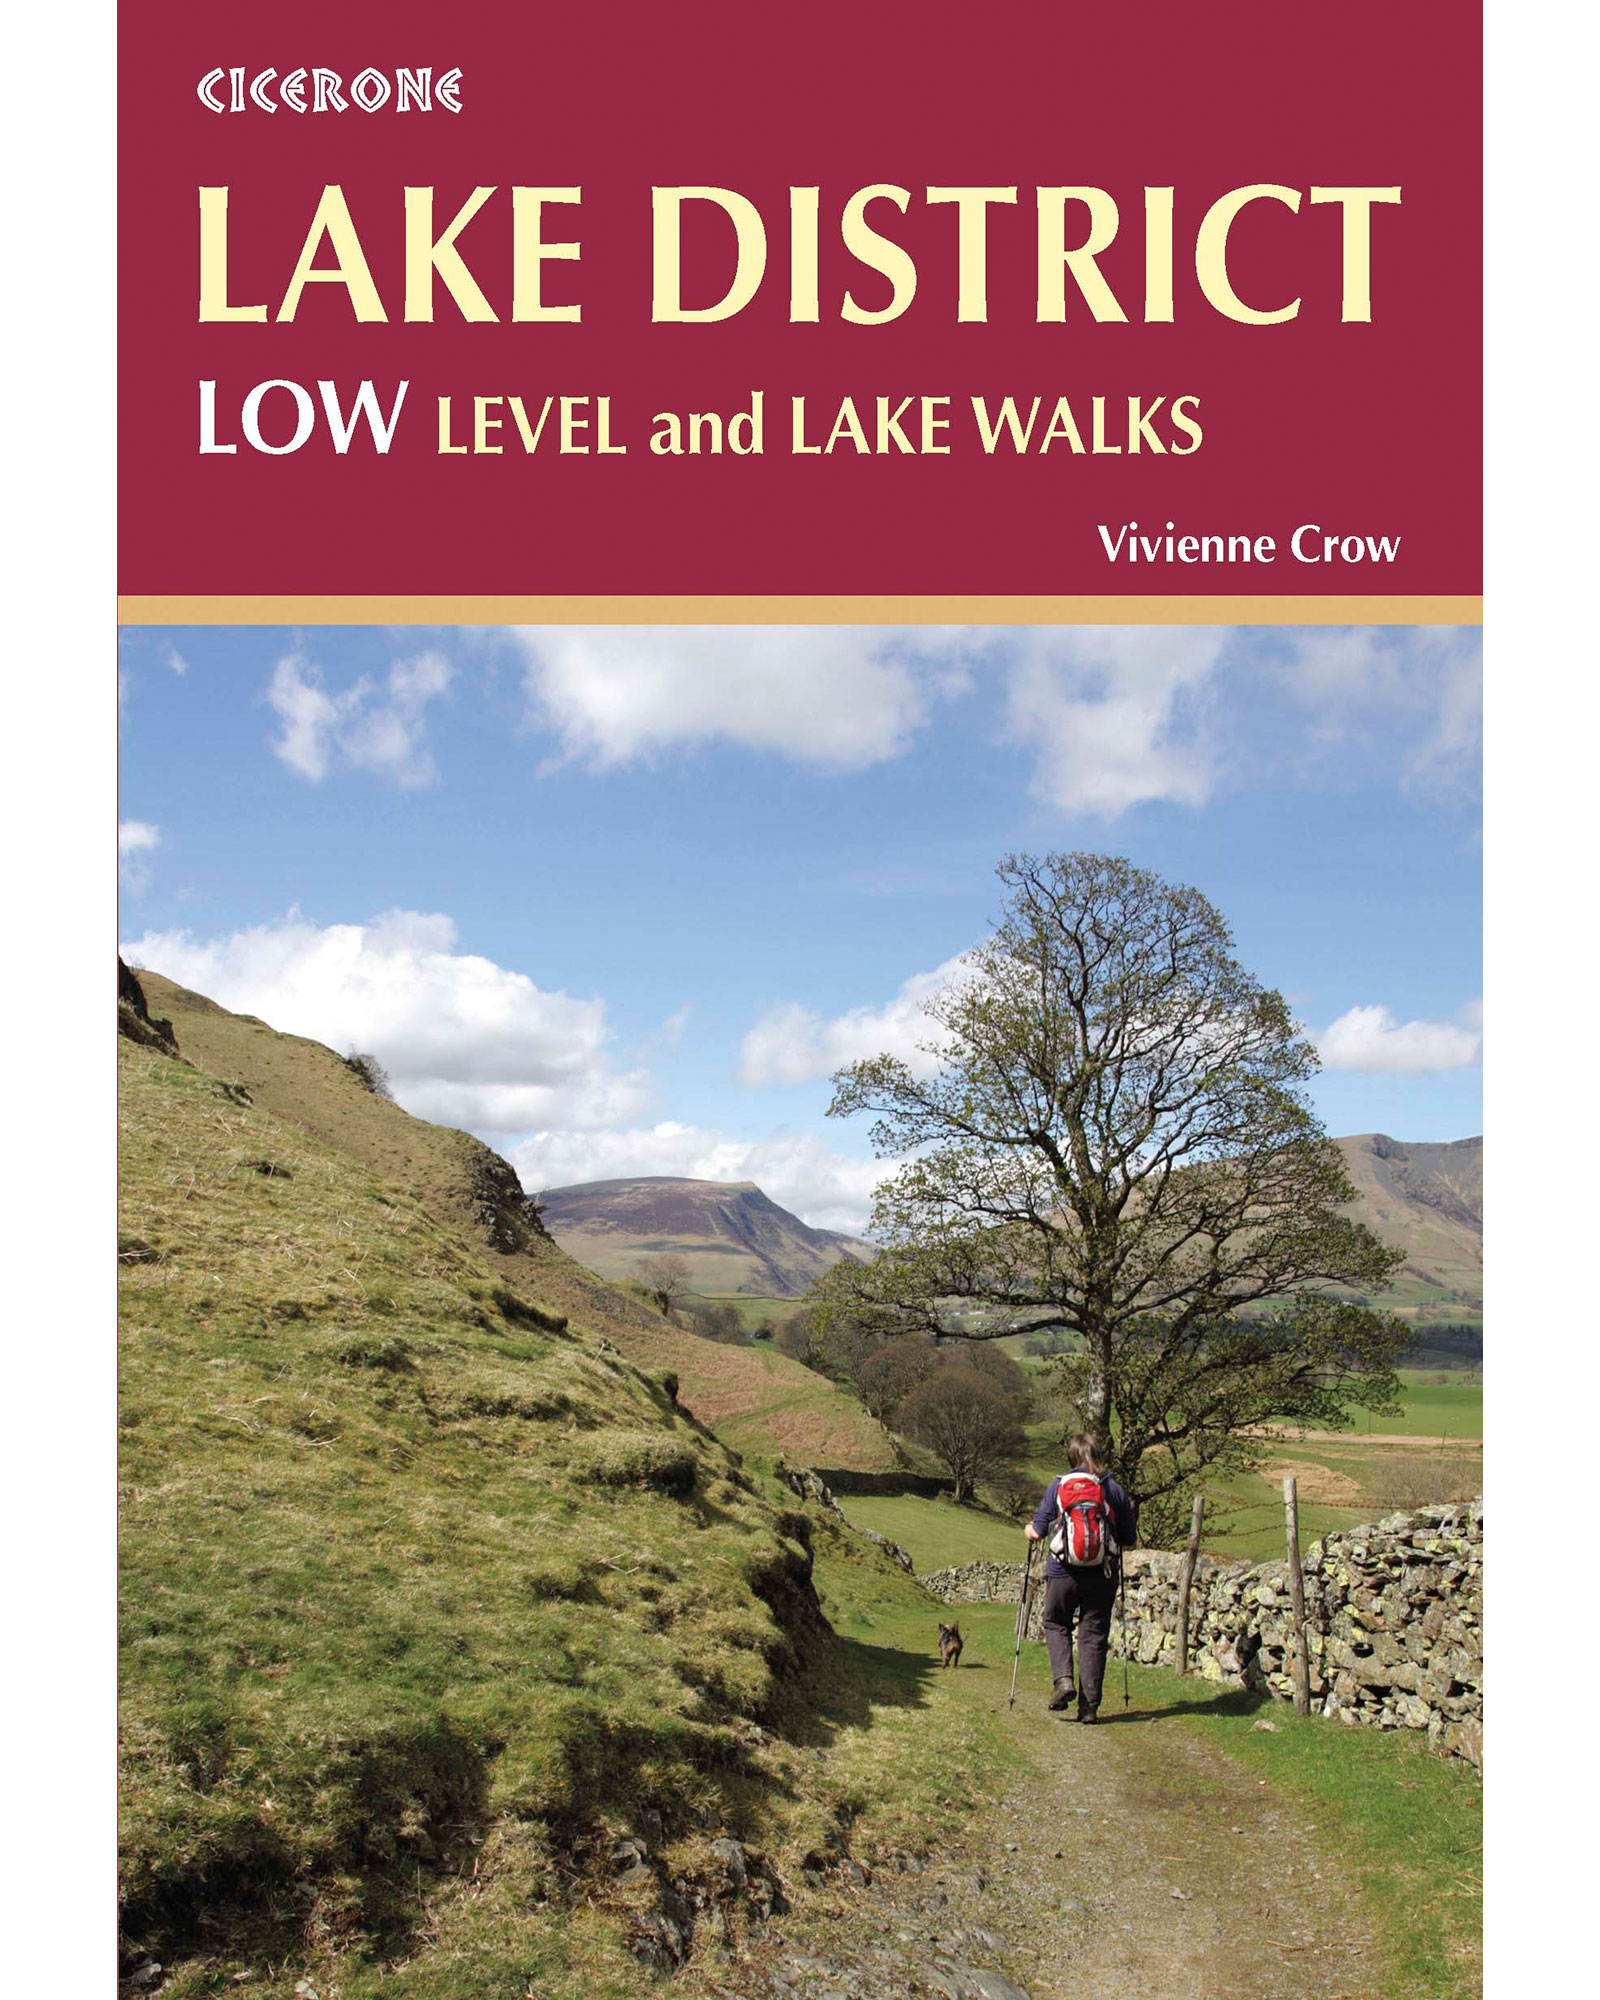 Cicerone Lake District: Low Level and Lake Walks Guide Book